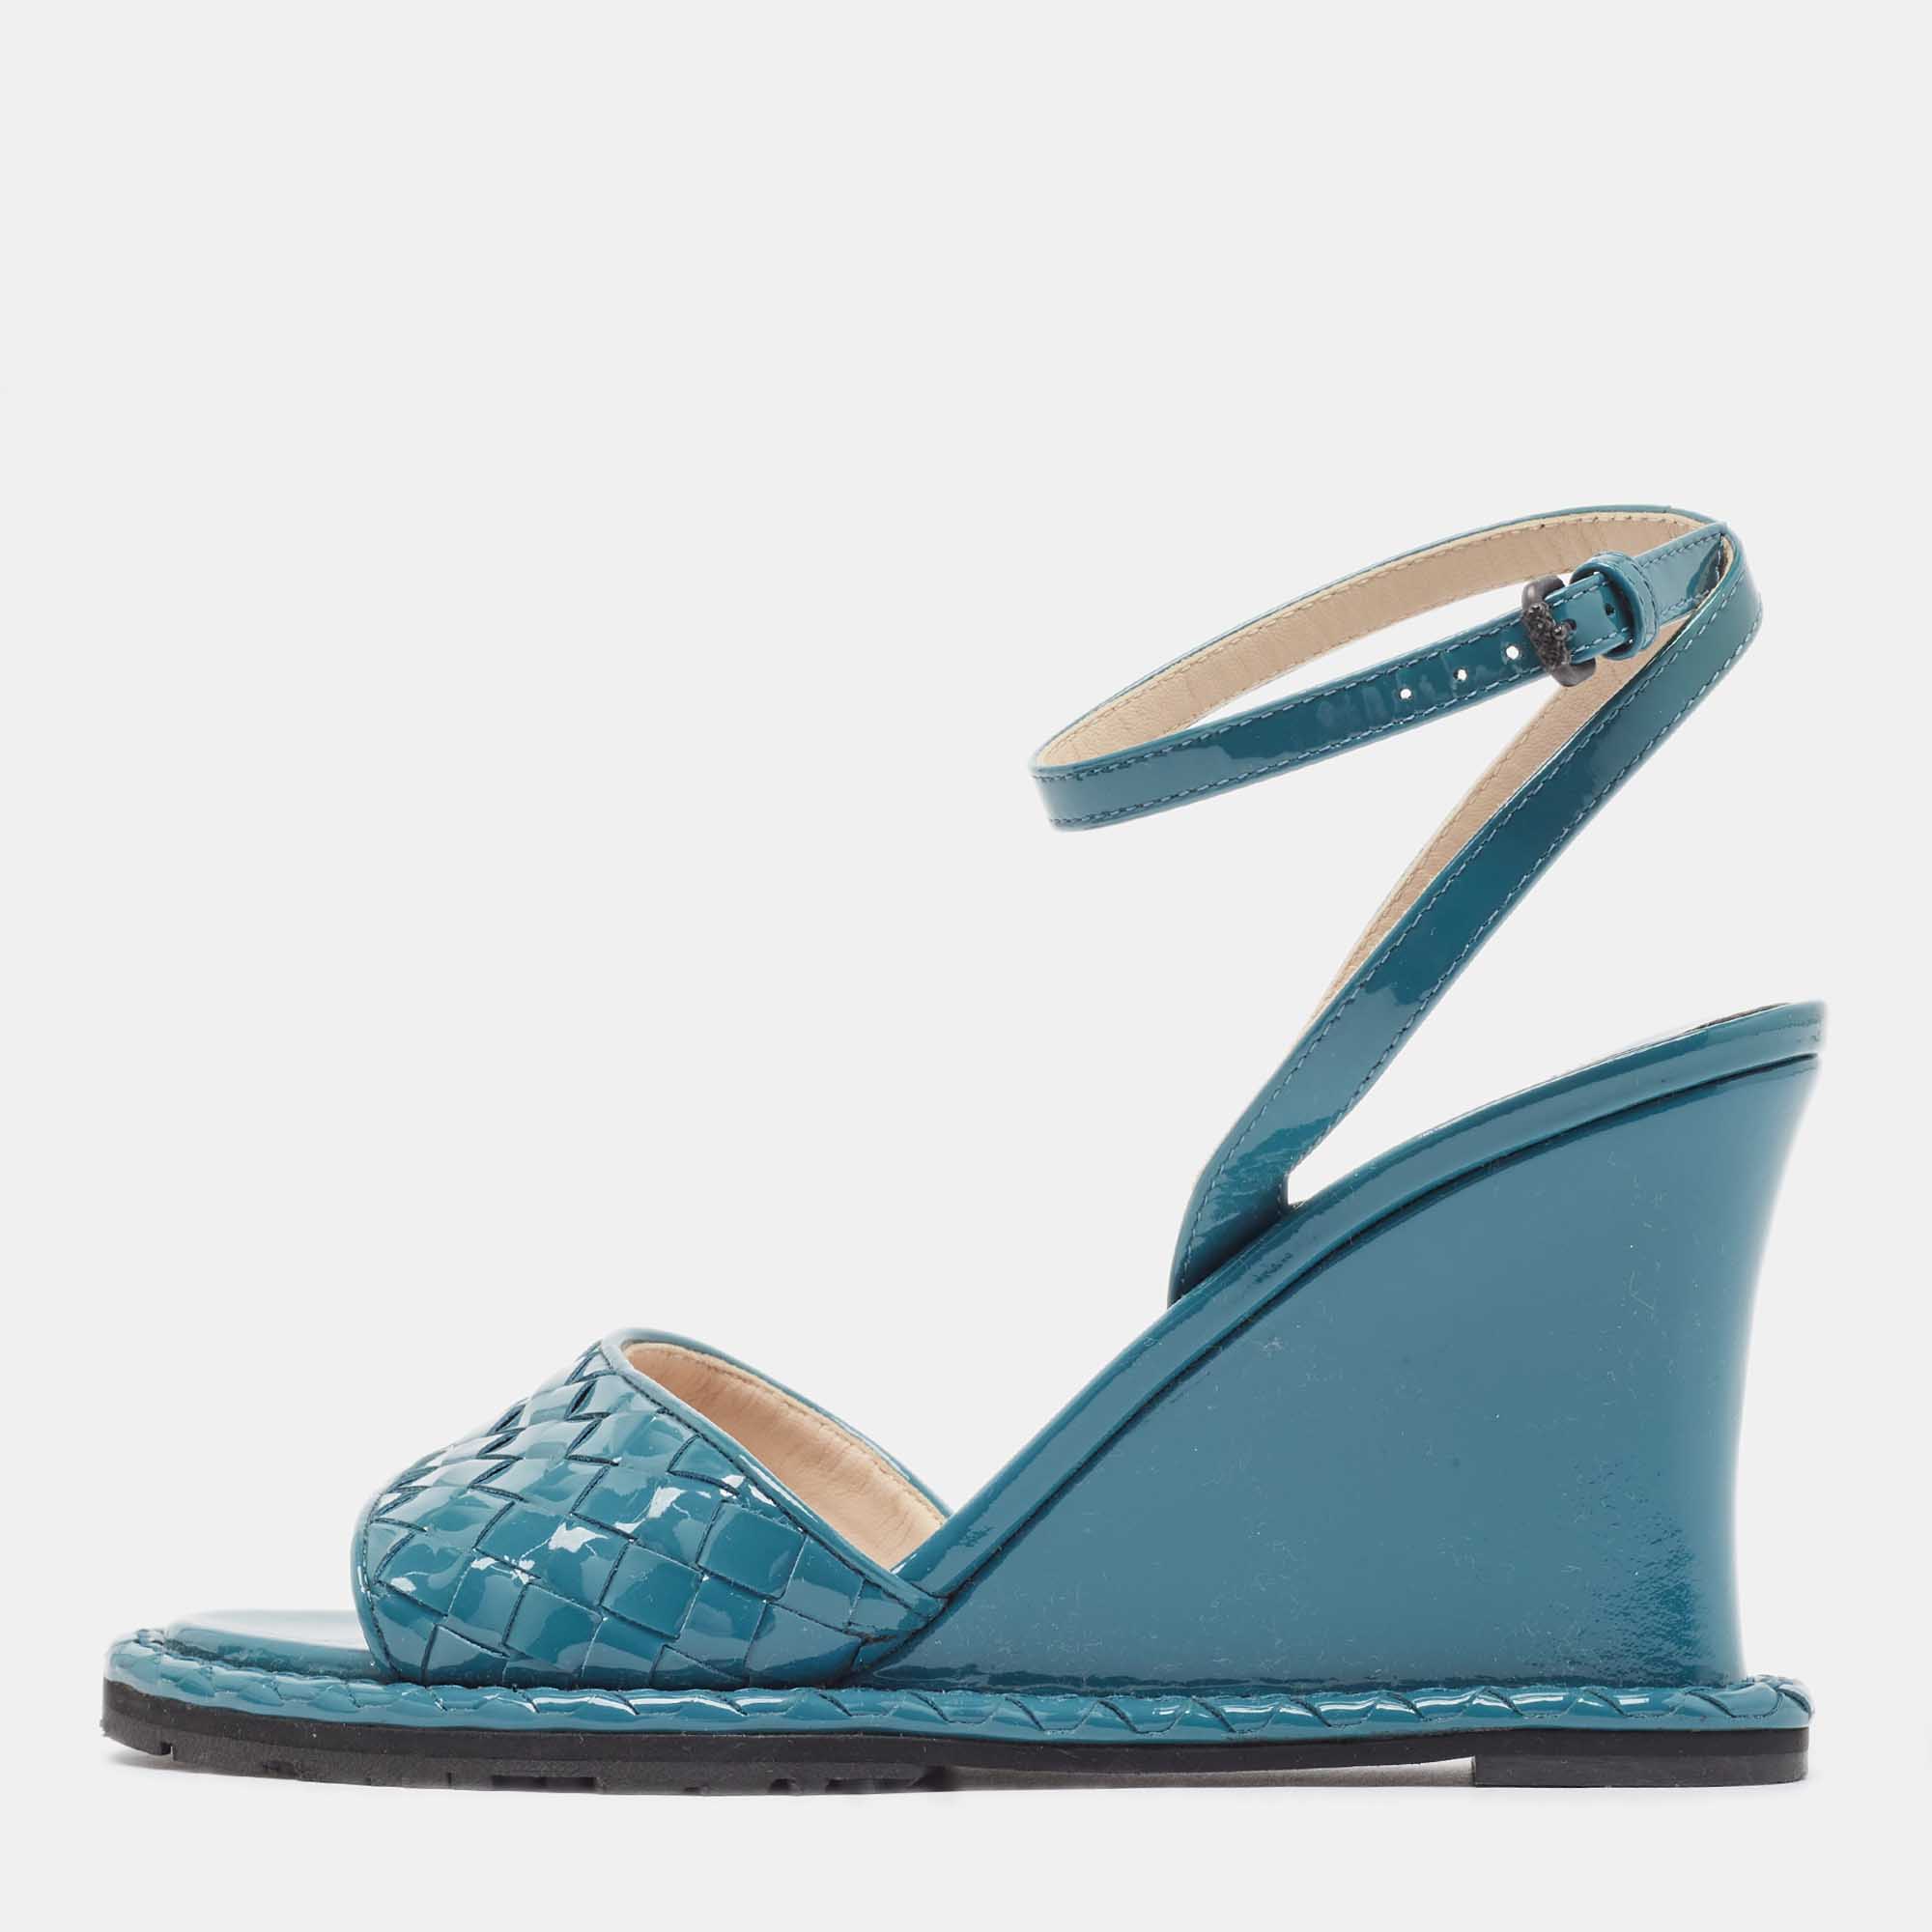 Wear these designer sandals to spruce up any outfit. They are versatile chic and can be easily styled. Made using quality materials these sandals are well built and long lasting.